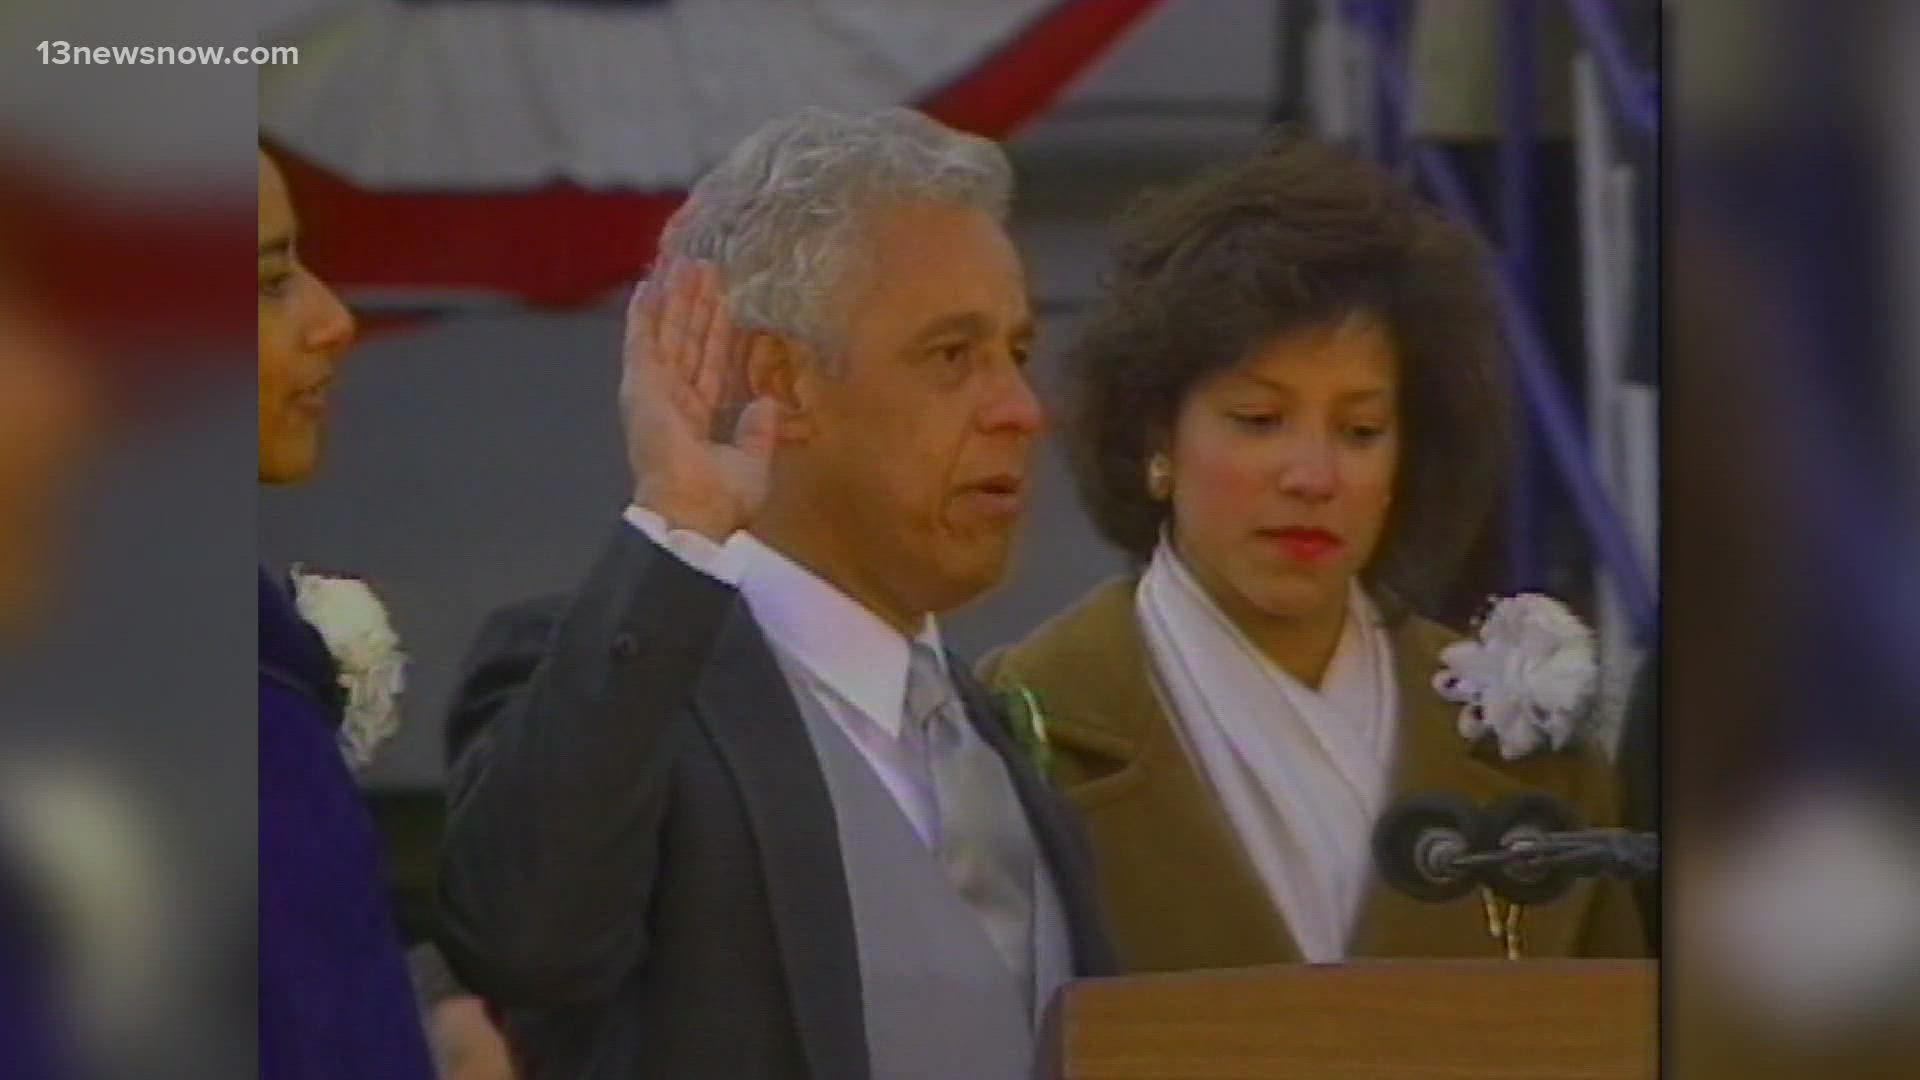 Douglas Wilder was sworn in on Jan. 13, 1990, becoming the 66th governor of Virginia.